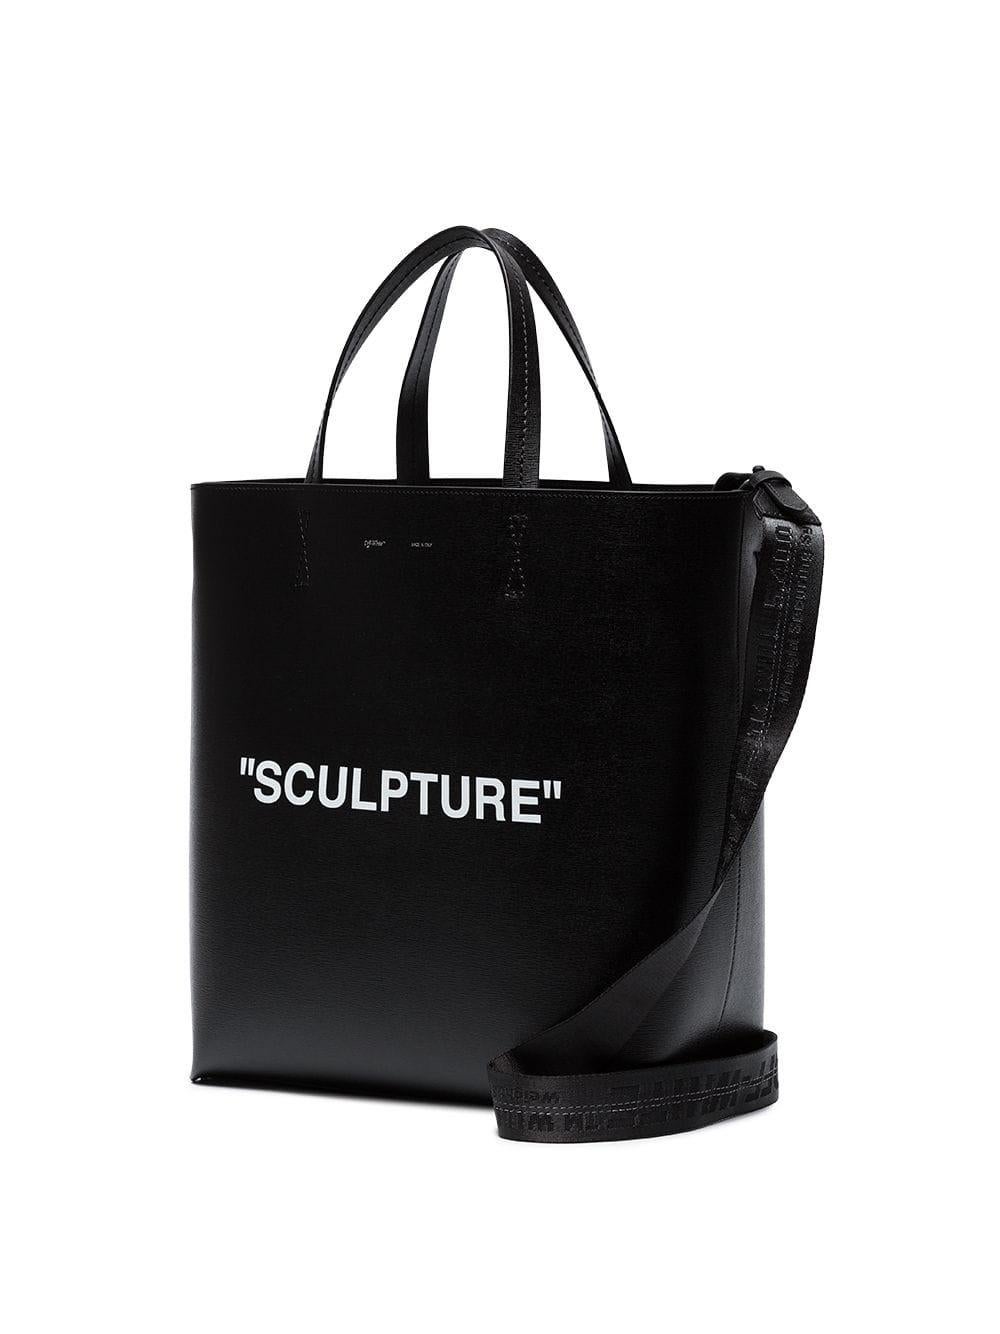 Women's Off-White Black Leather Sculpture Tote Bag one size